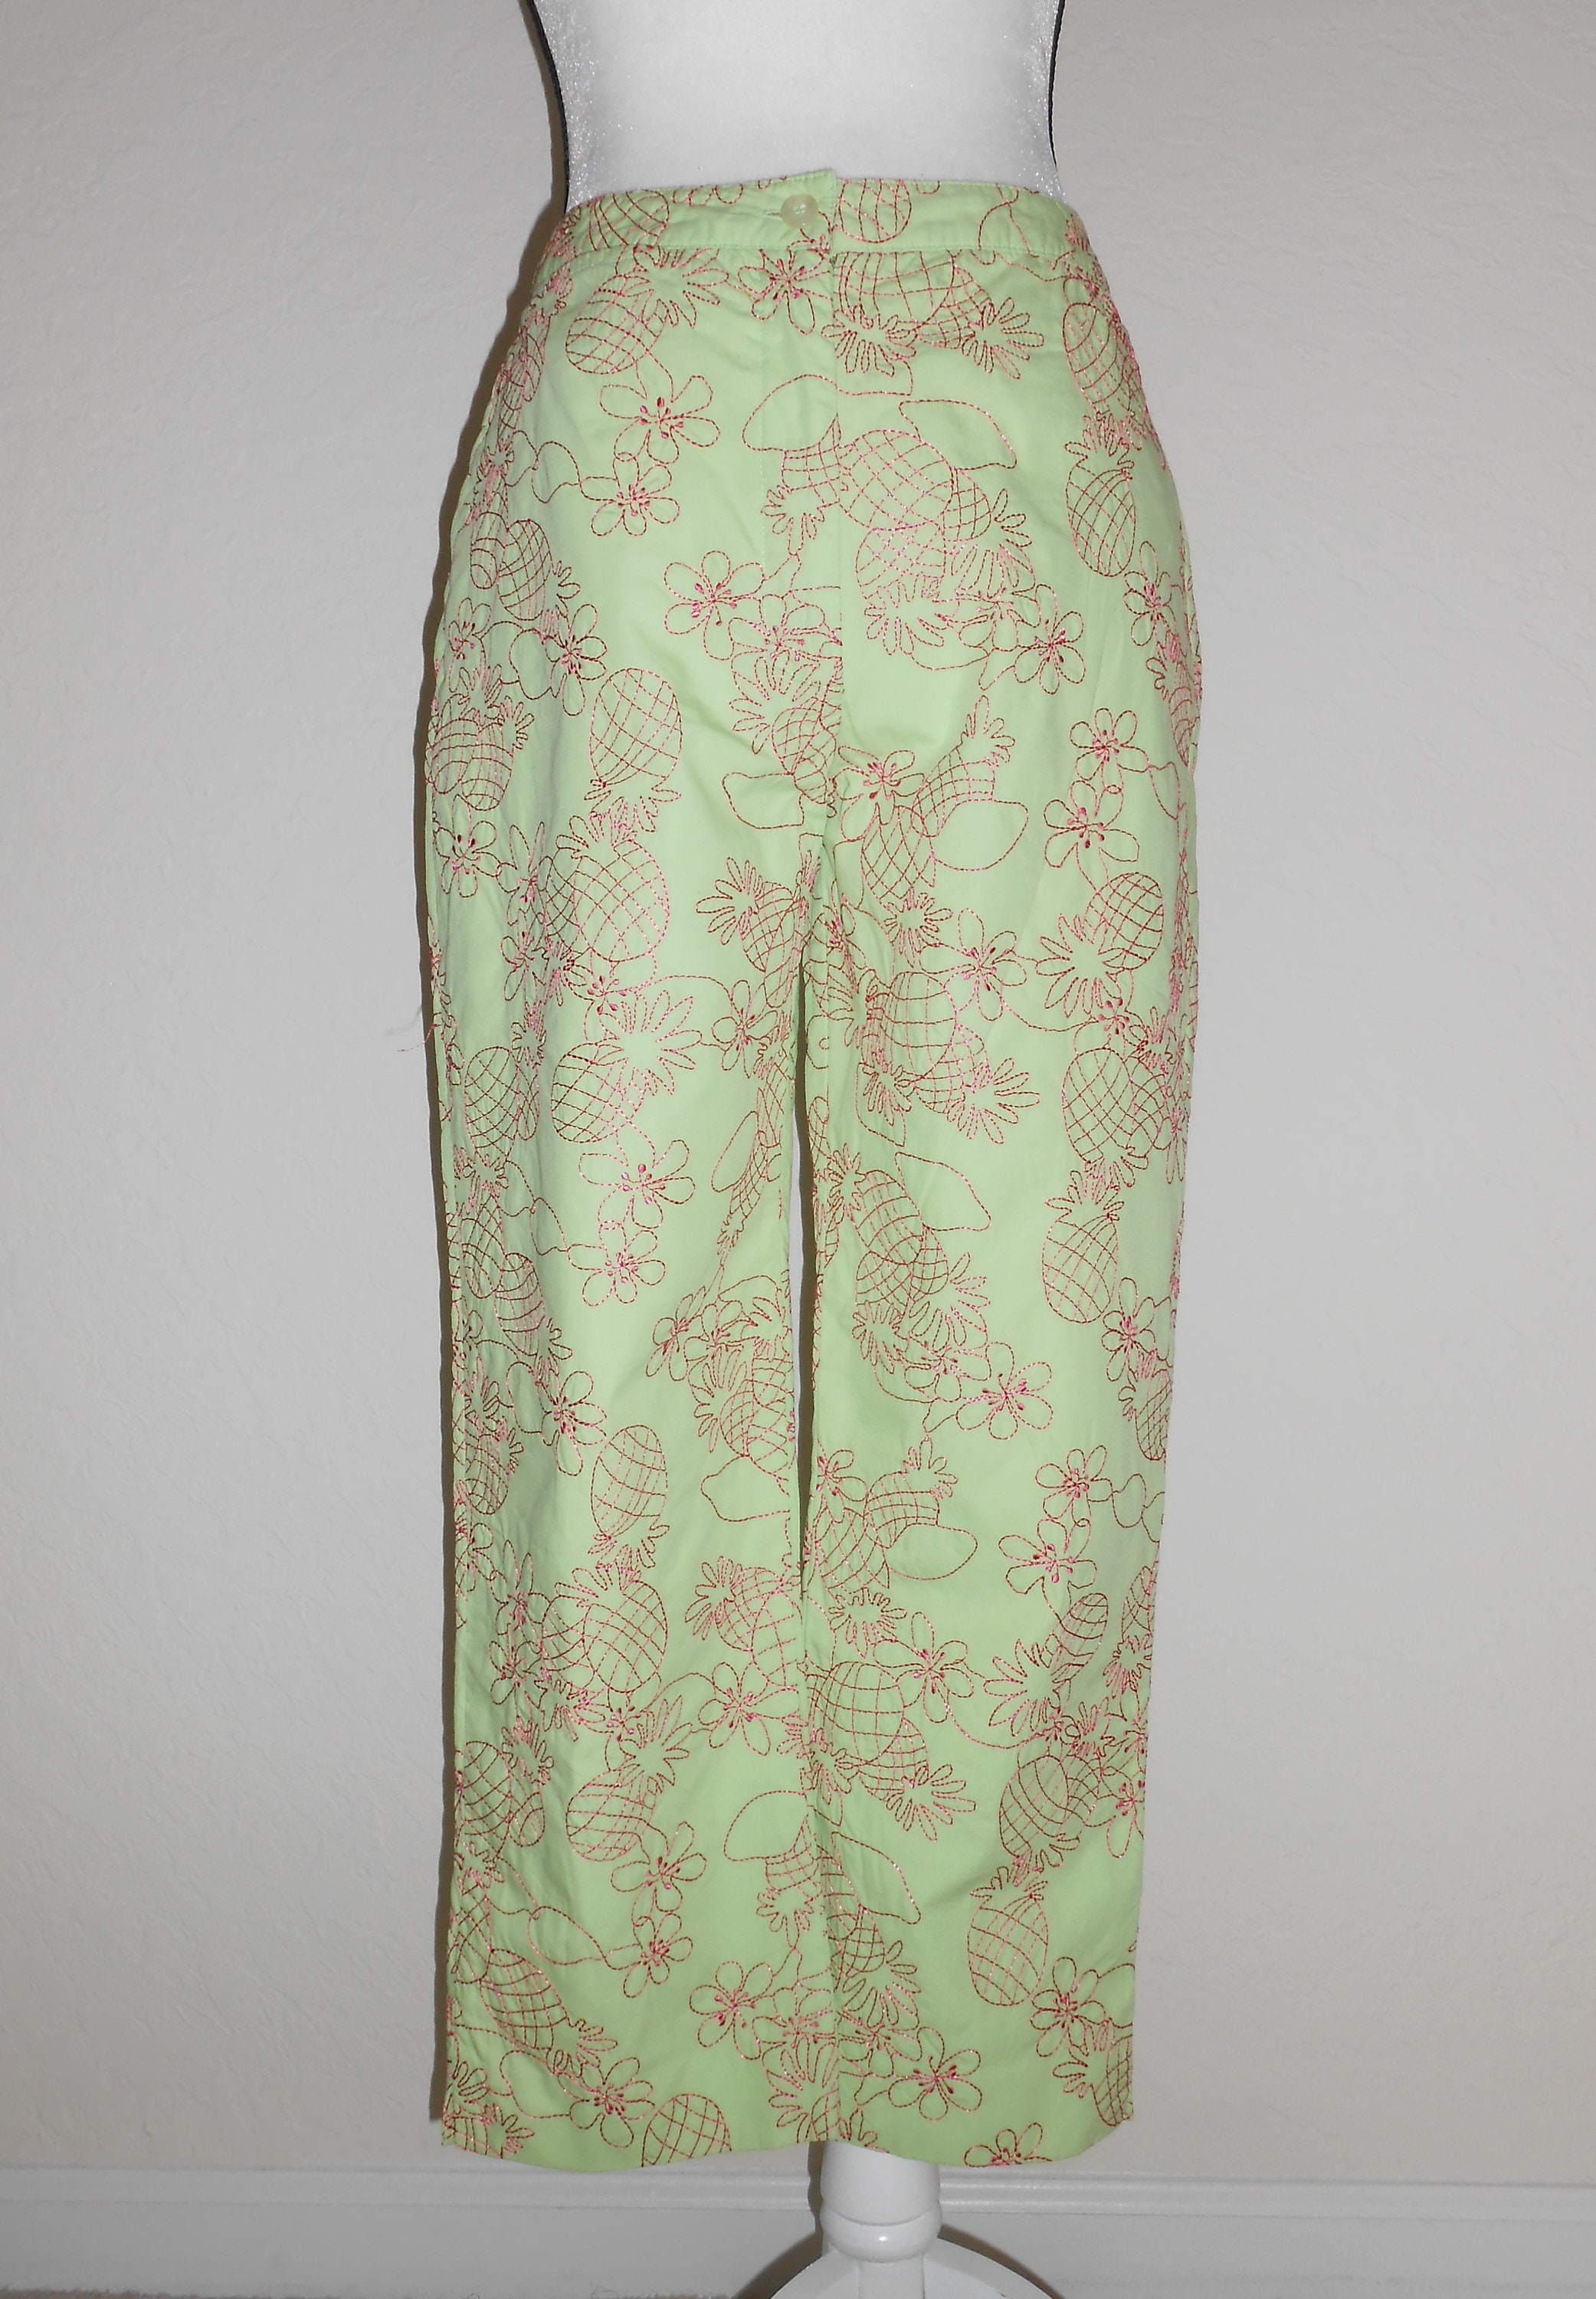 Vtg Lilly Pulitzer Capri Pants Size 6 Cropped Pant Blue Green With